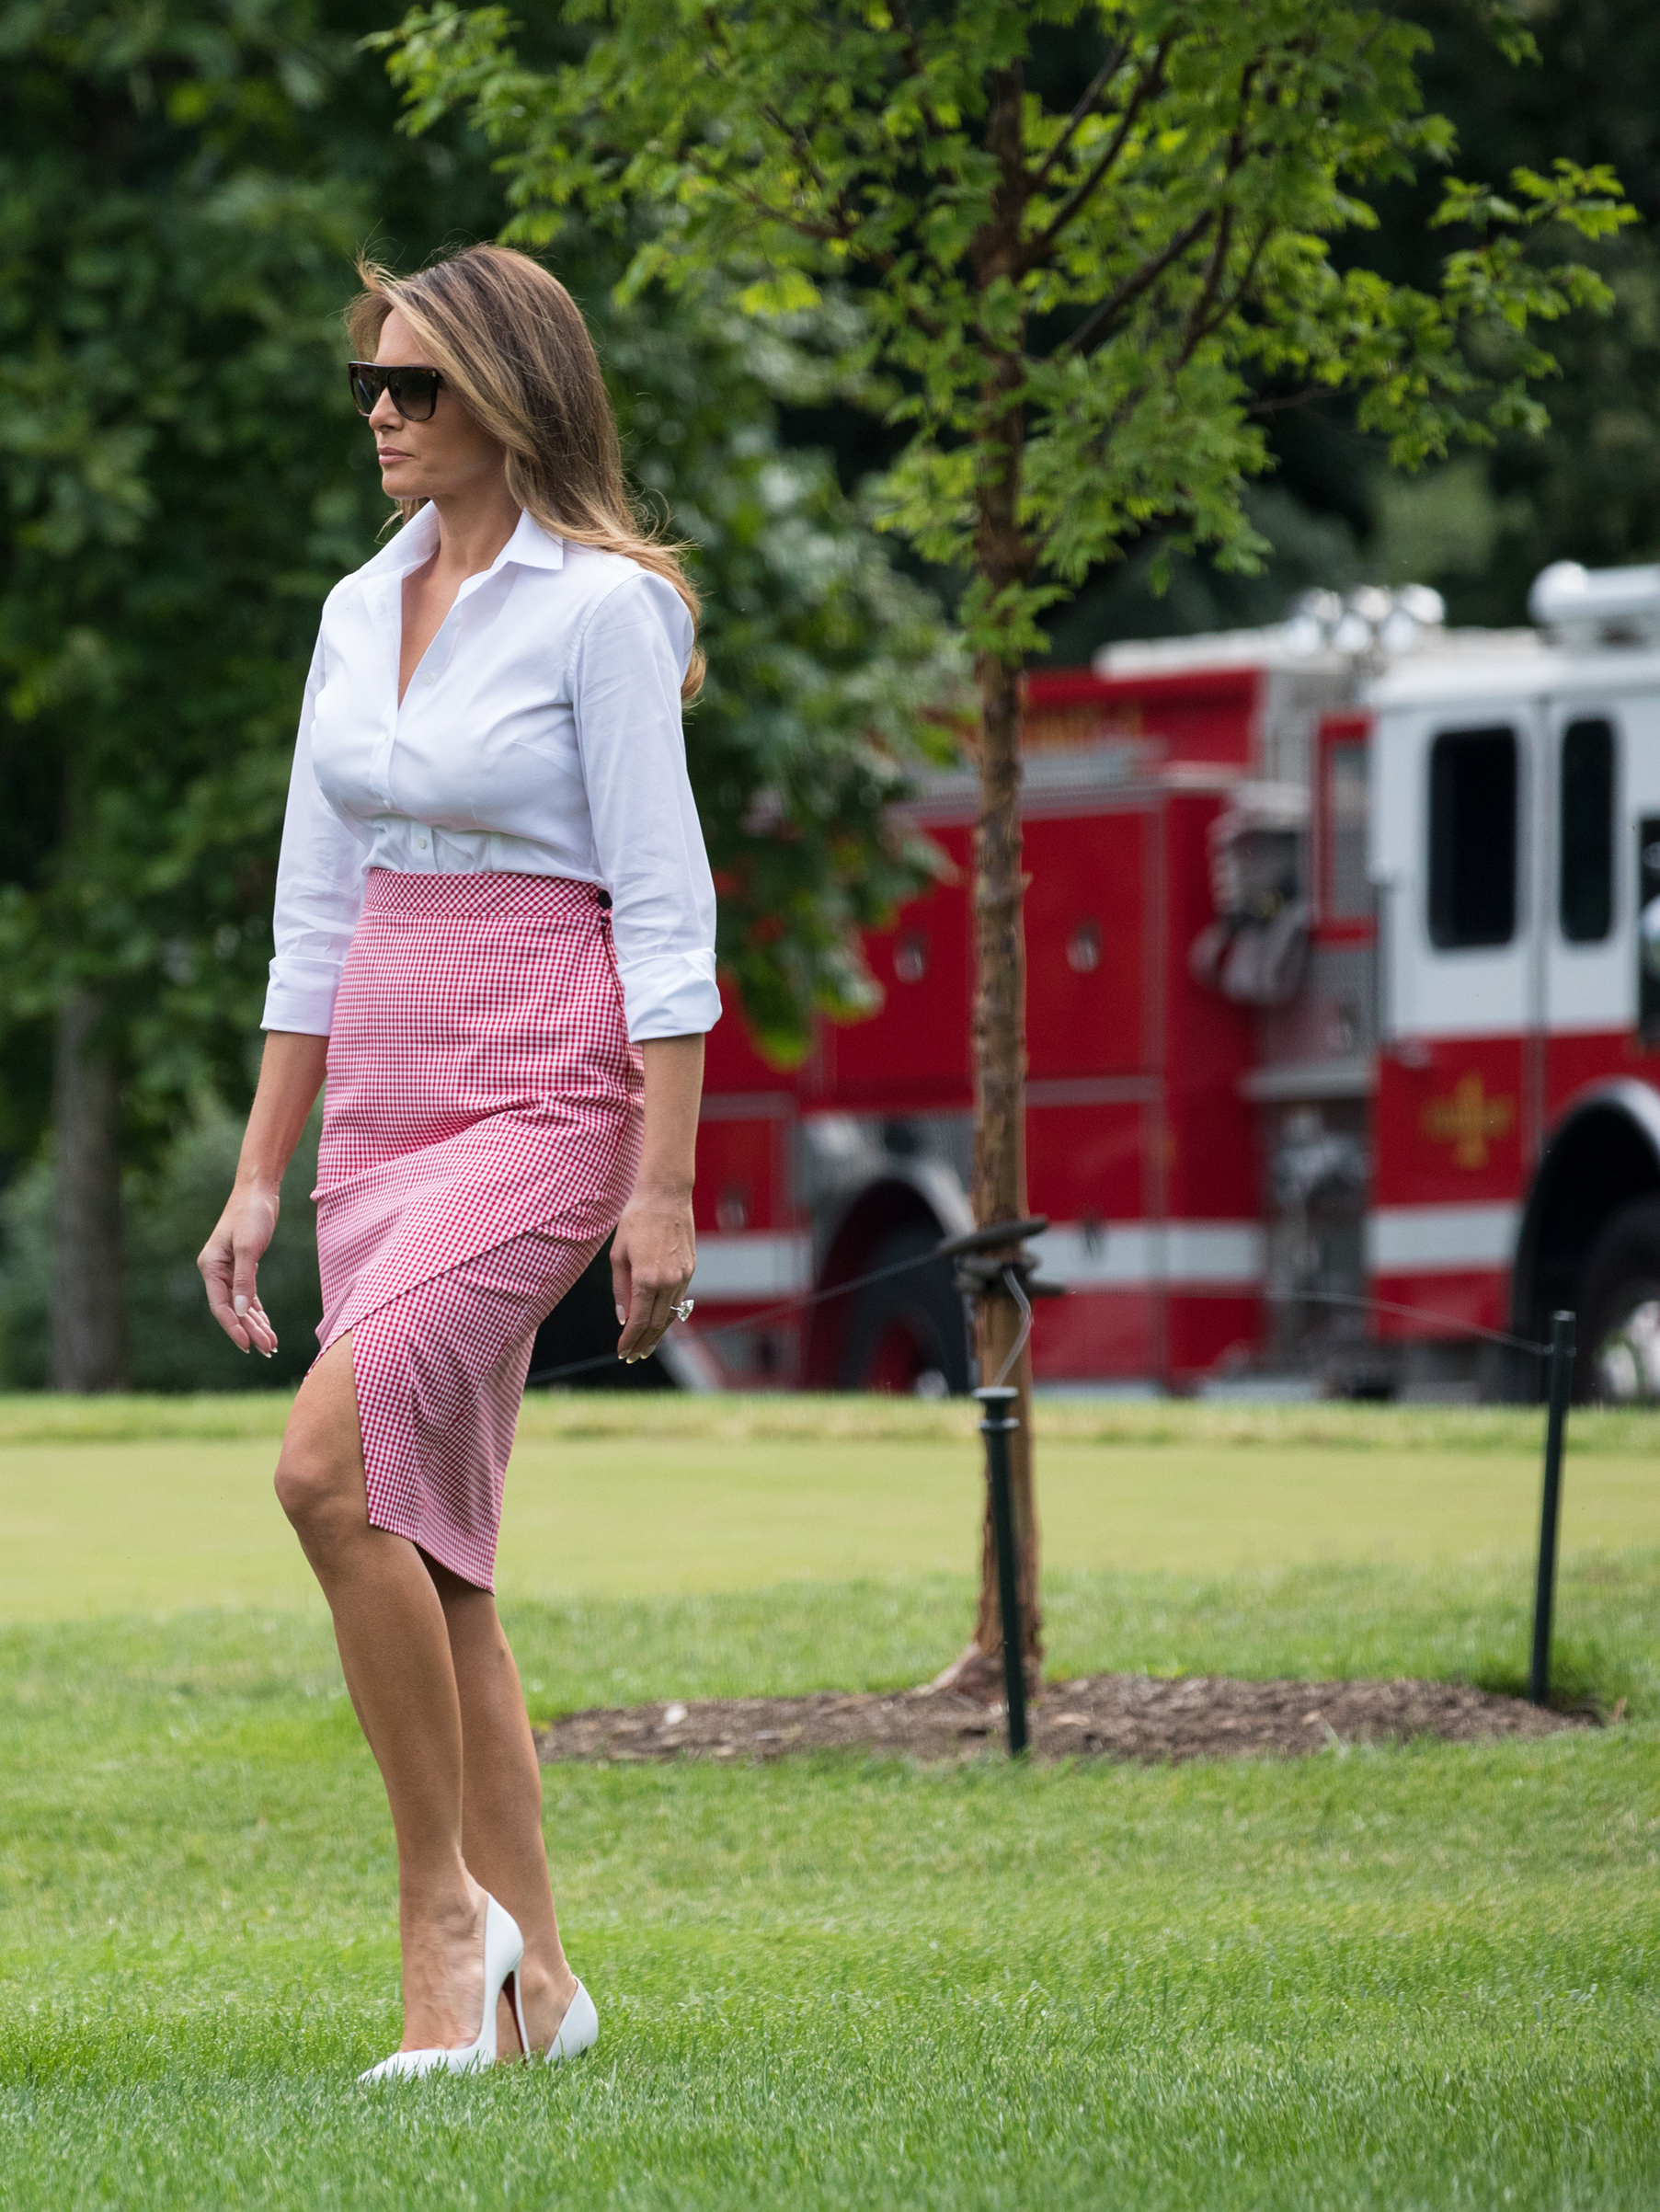 First lady Melania Trump wearing a gingham wrap-effect skirt by Altuzarra and a white top, walks with her husband President Donald and their son Barron on the South Lawn of the White House in Washington, D.C., before their departure to Camp David, June 17, 2017.